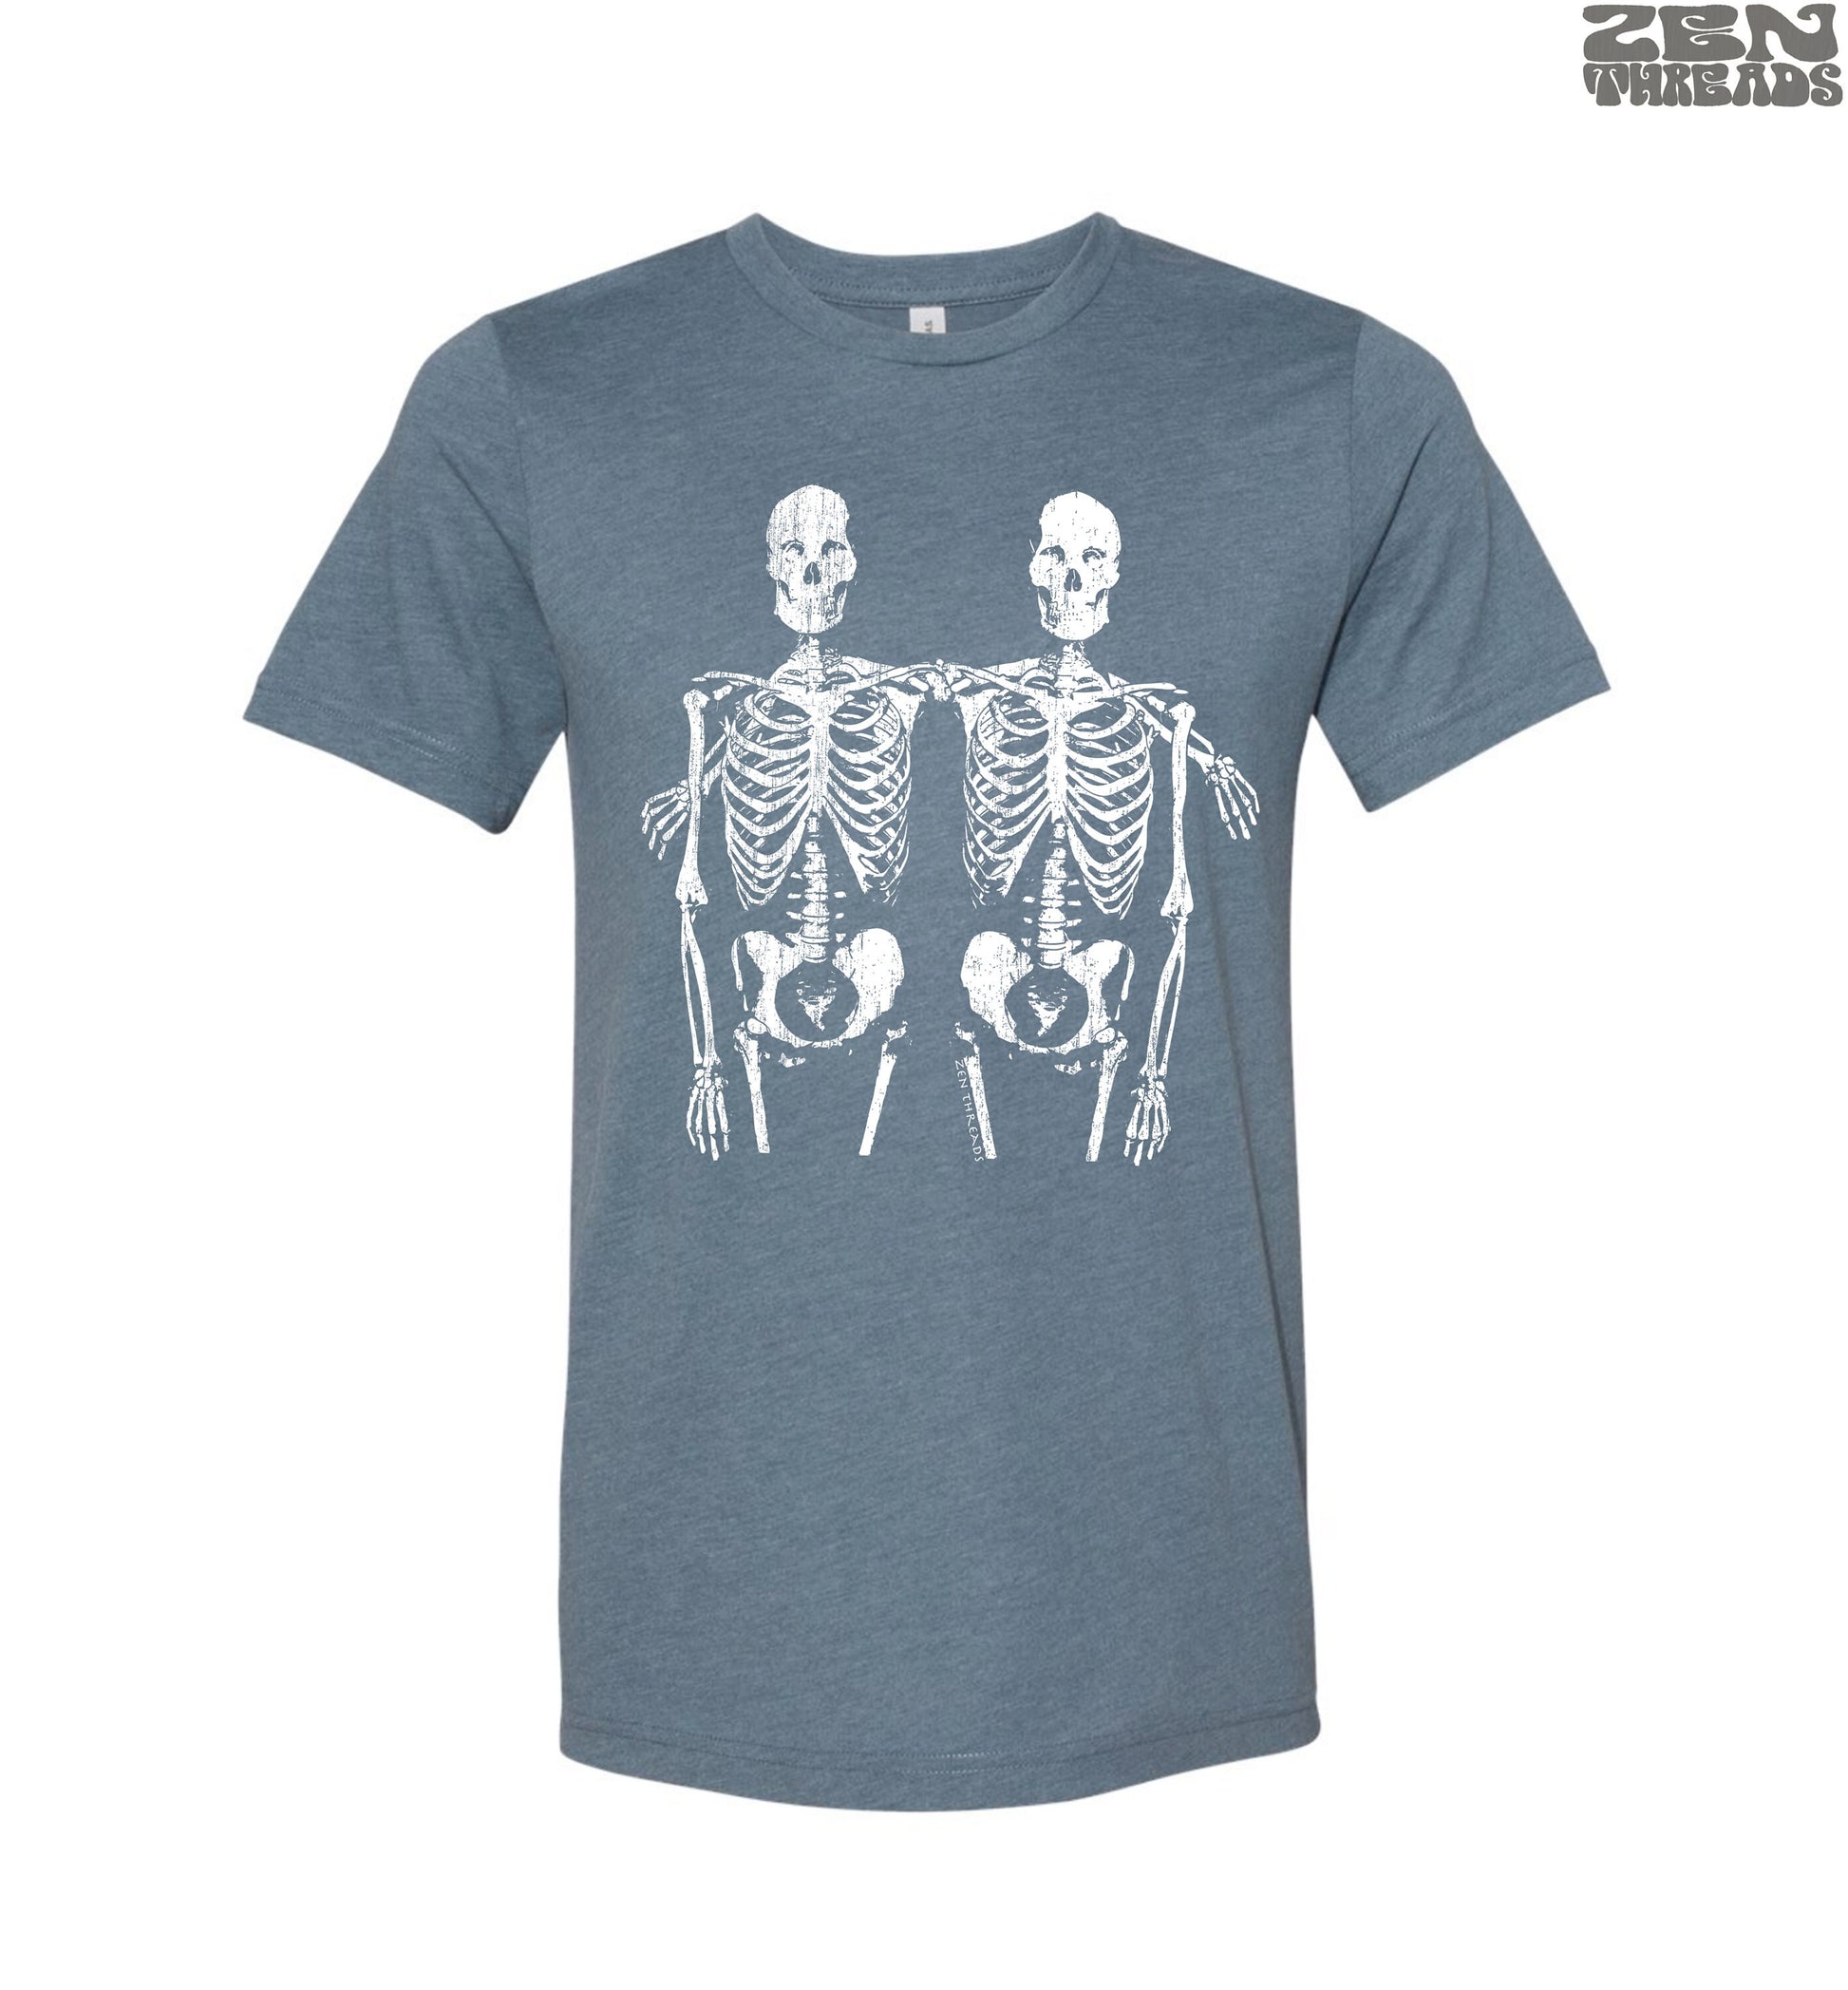 SKELETONS Friends 'Til the End Unisex Bella Canvas T-Shirt mens women's couples tee anatomy shirt medical student tee best forever funny